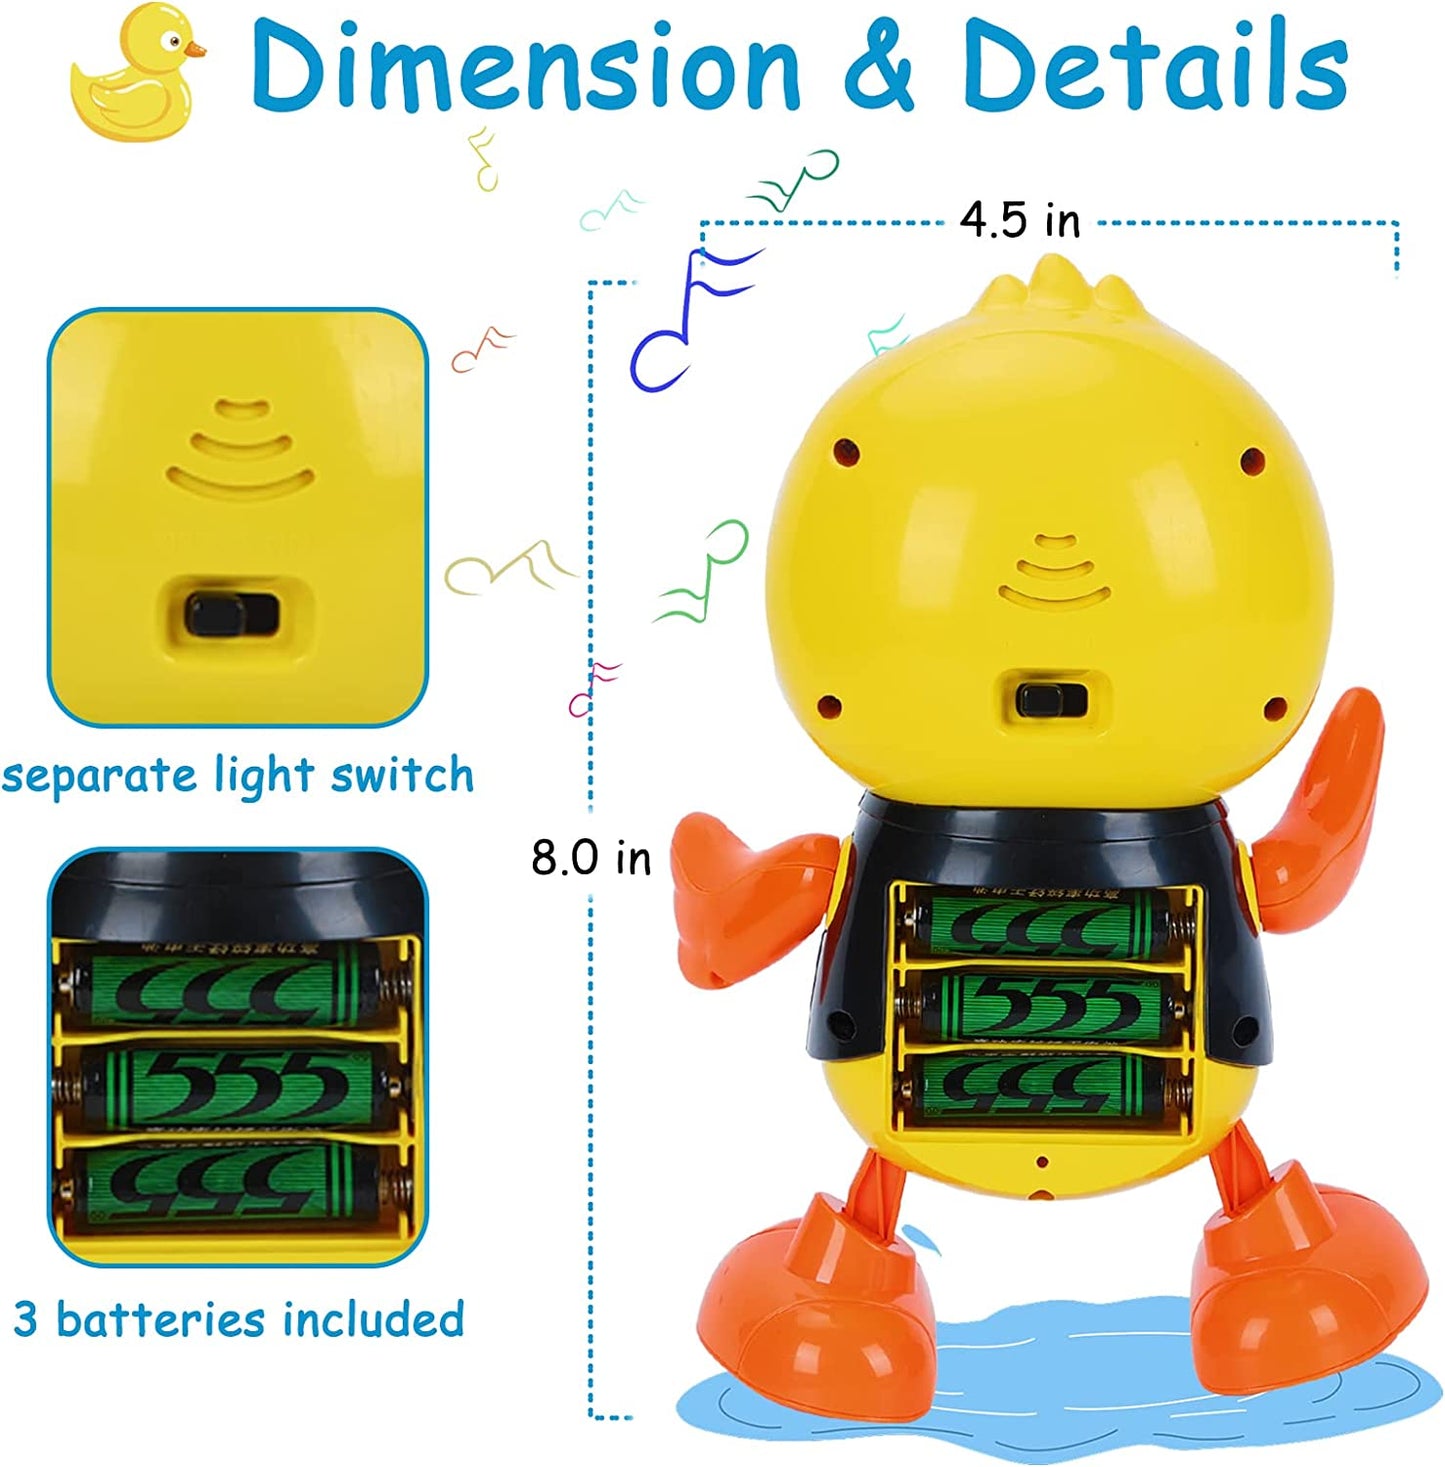 Baby Musical Toys, Crawling Toy, With Music And Led Lights, Walking Toy, Educational Tummy Time Duck Toy